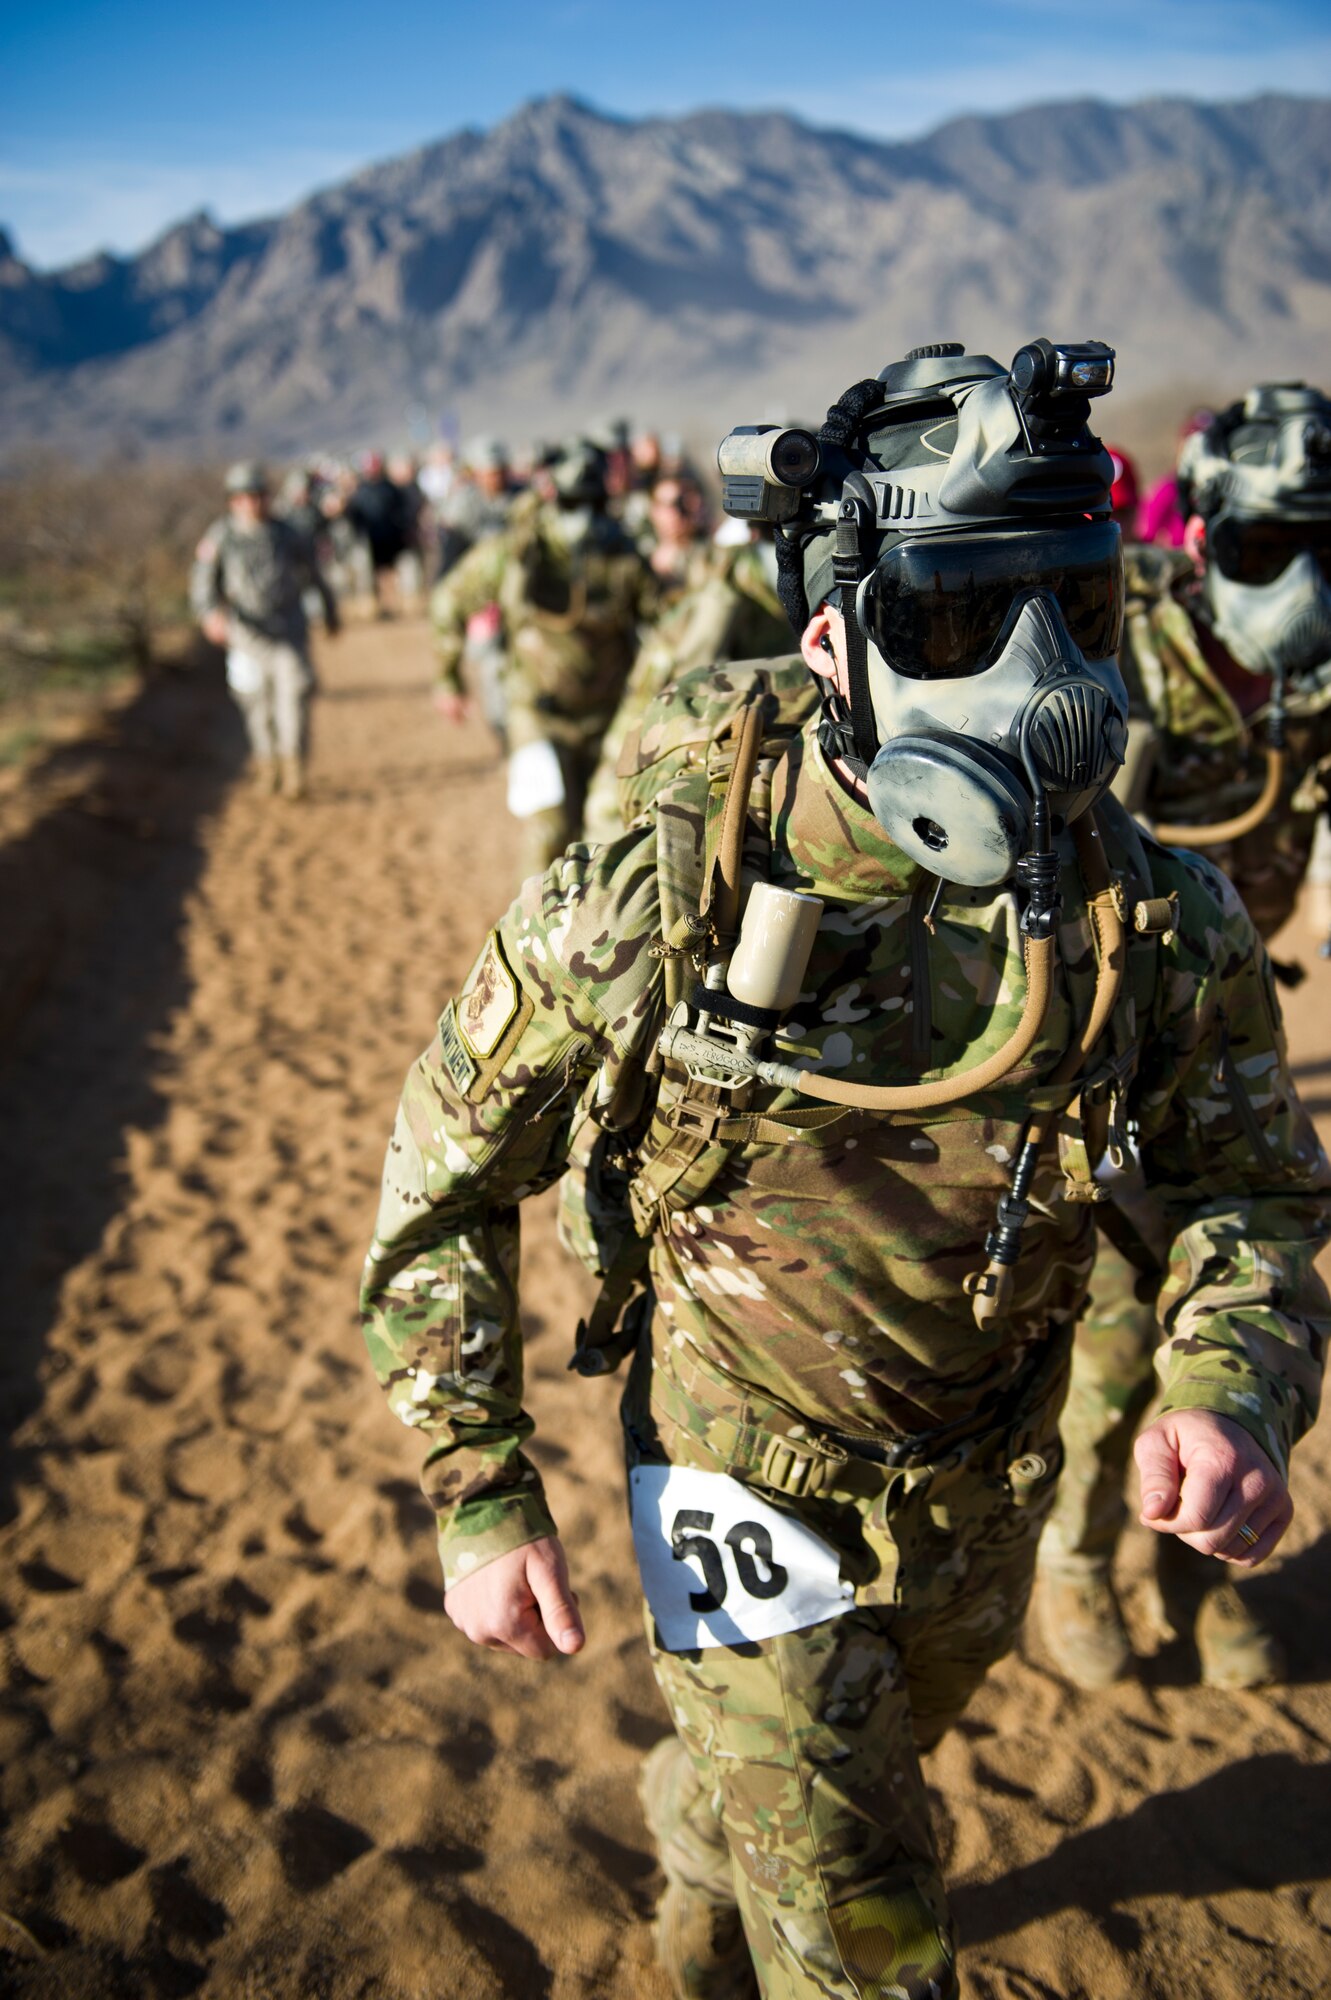 WHITE SANDS MISSILE RANGE, N.M. – Participants donning gas masks compete in the team category of the Bataan Memorial Death March here March 25. The event included categories of: civilian - light; civilian - heavy, with a 35-pound backpack; military - light; military - heavy, with a 35-pound backpack; Reserve Officers' Training Corps - light; and ROTC - heavy, with a 35-pound backpack. (U.S. Air Force photo by Airman 1st Class Daniel E. Liddicoet/Released)